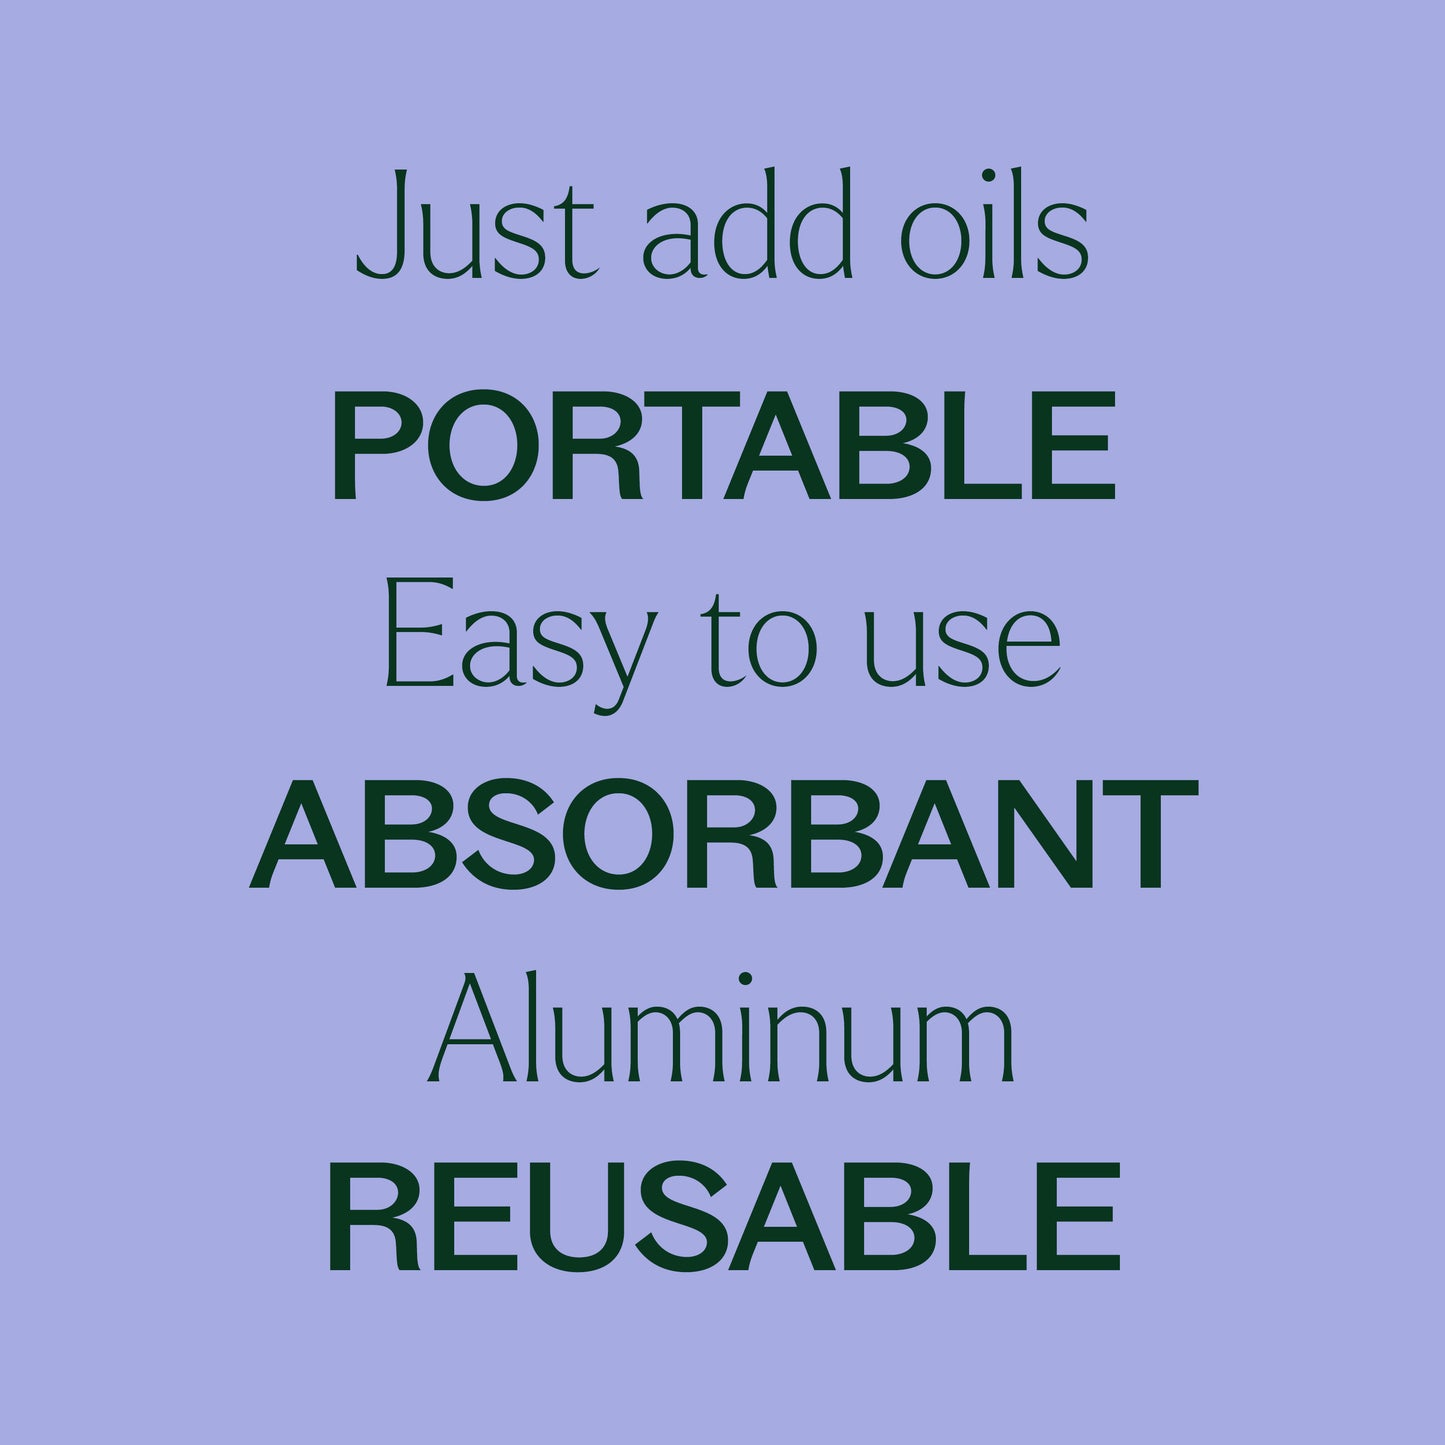 just add oils. easy to use. aluminum. portable, absorbant, reusable